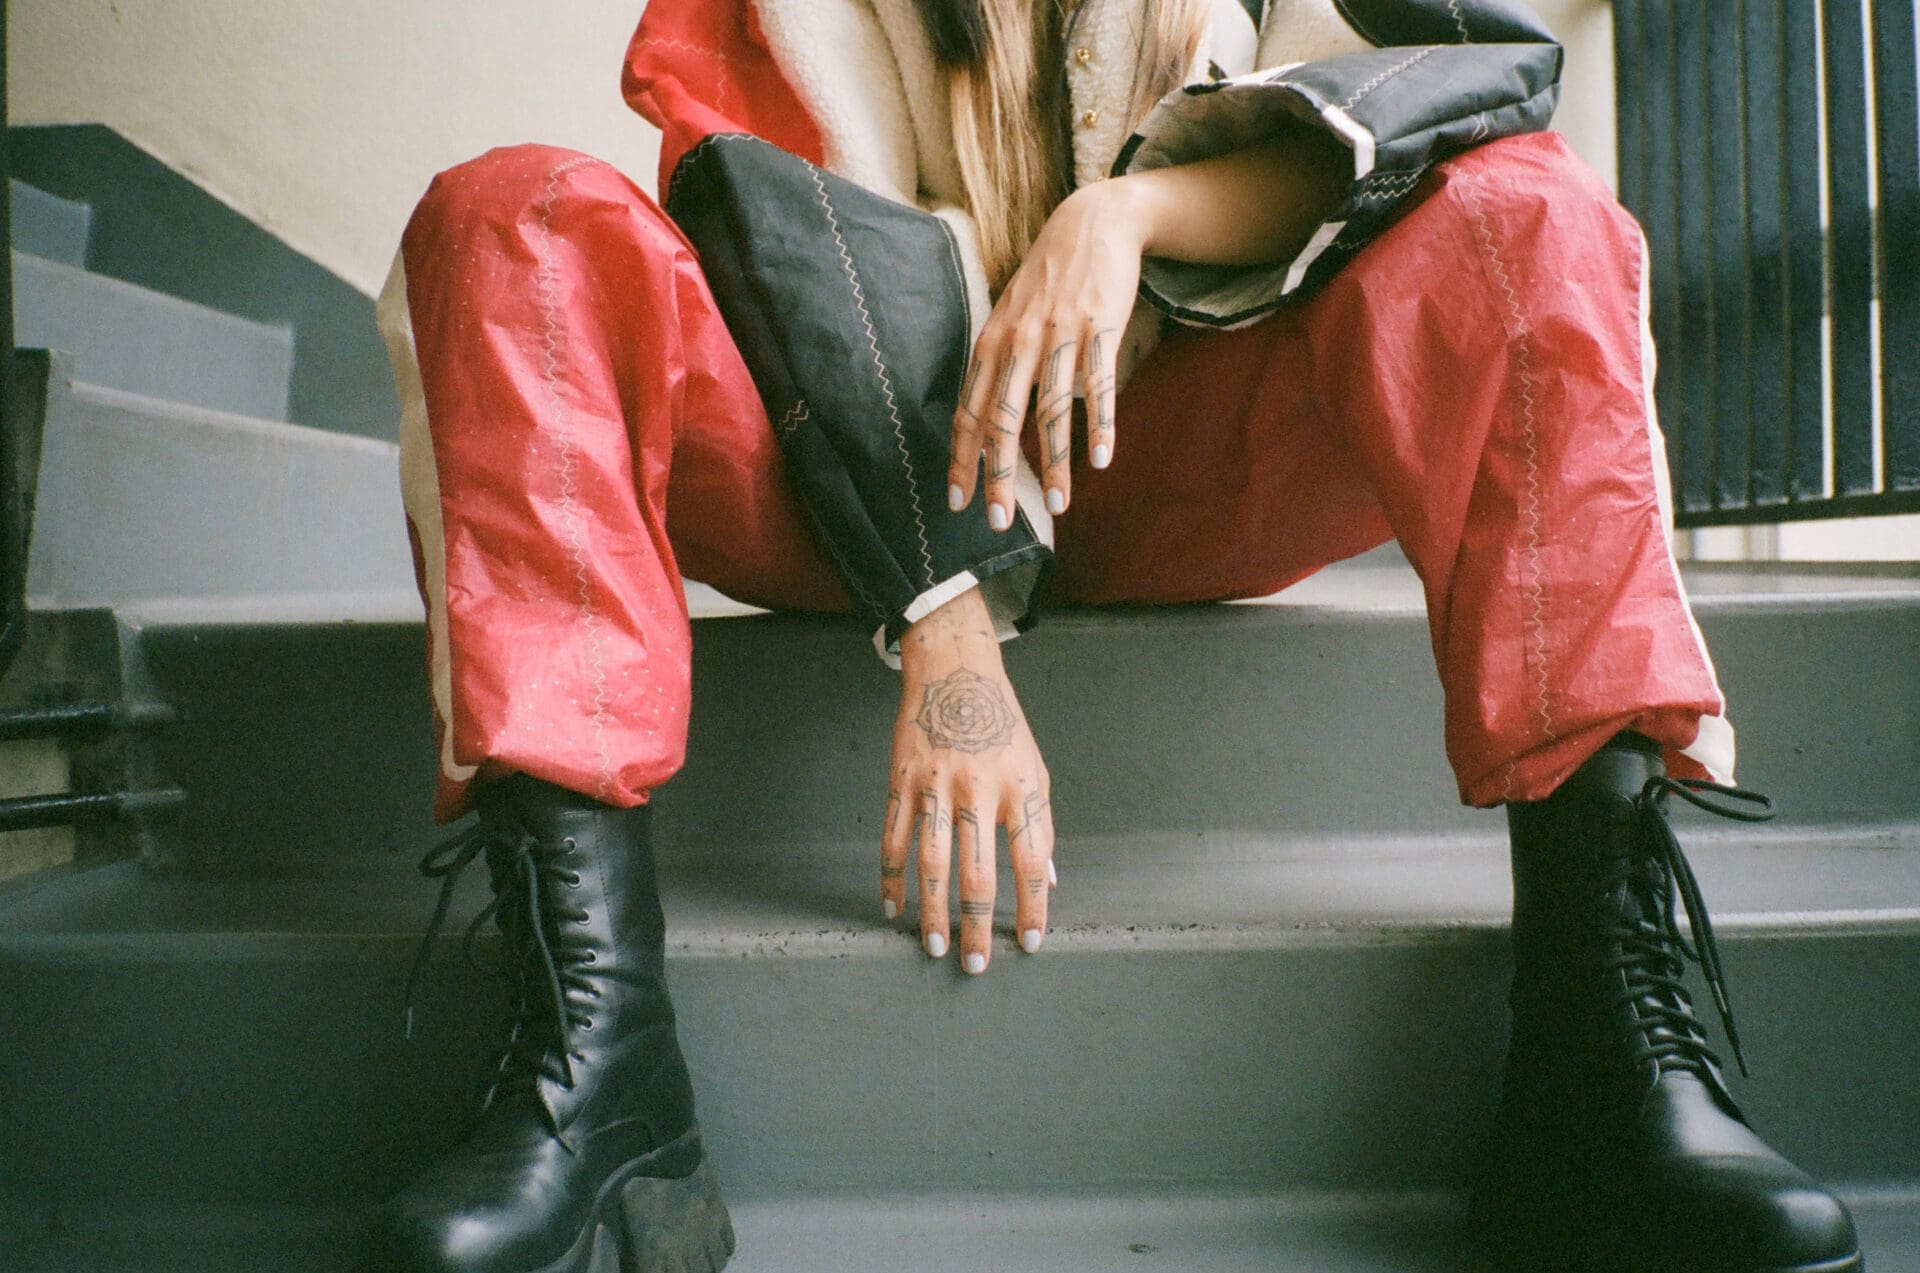 An interview with Thai pop singer Pyra | Pyra sat on metal stairs, with her red trousers, black lace up boots, and hand design visible.